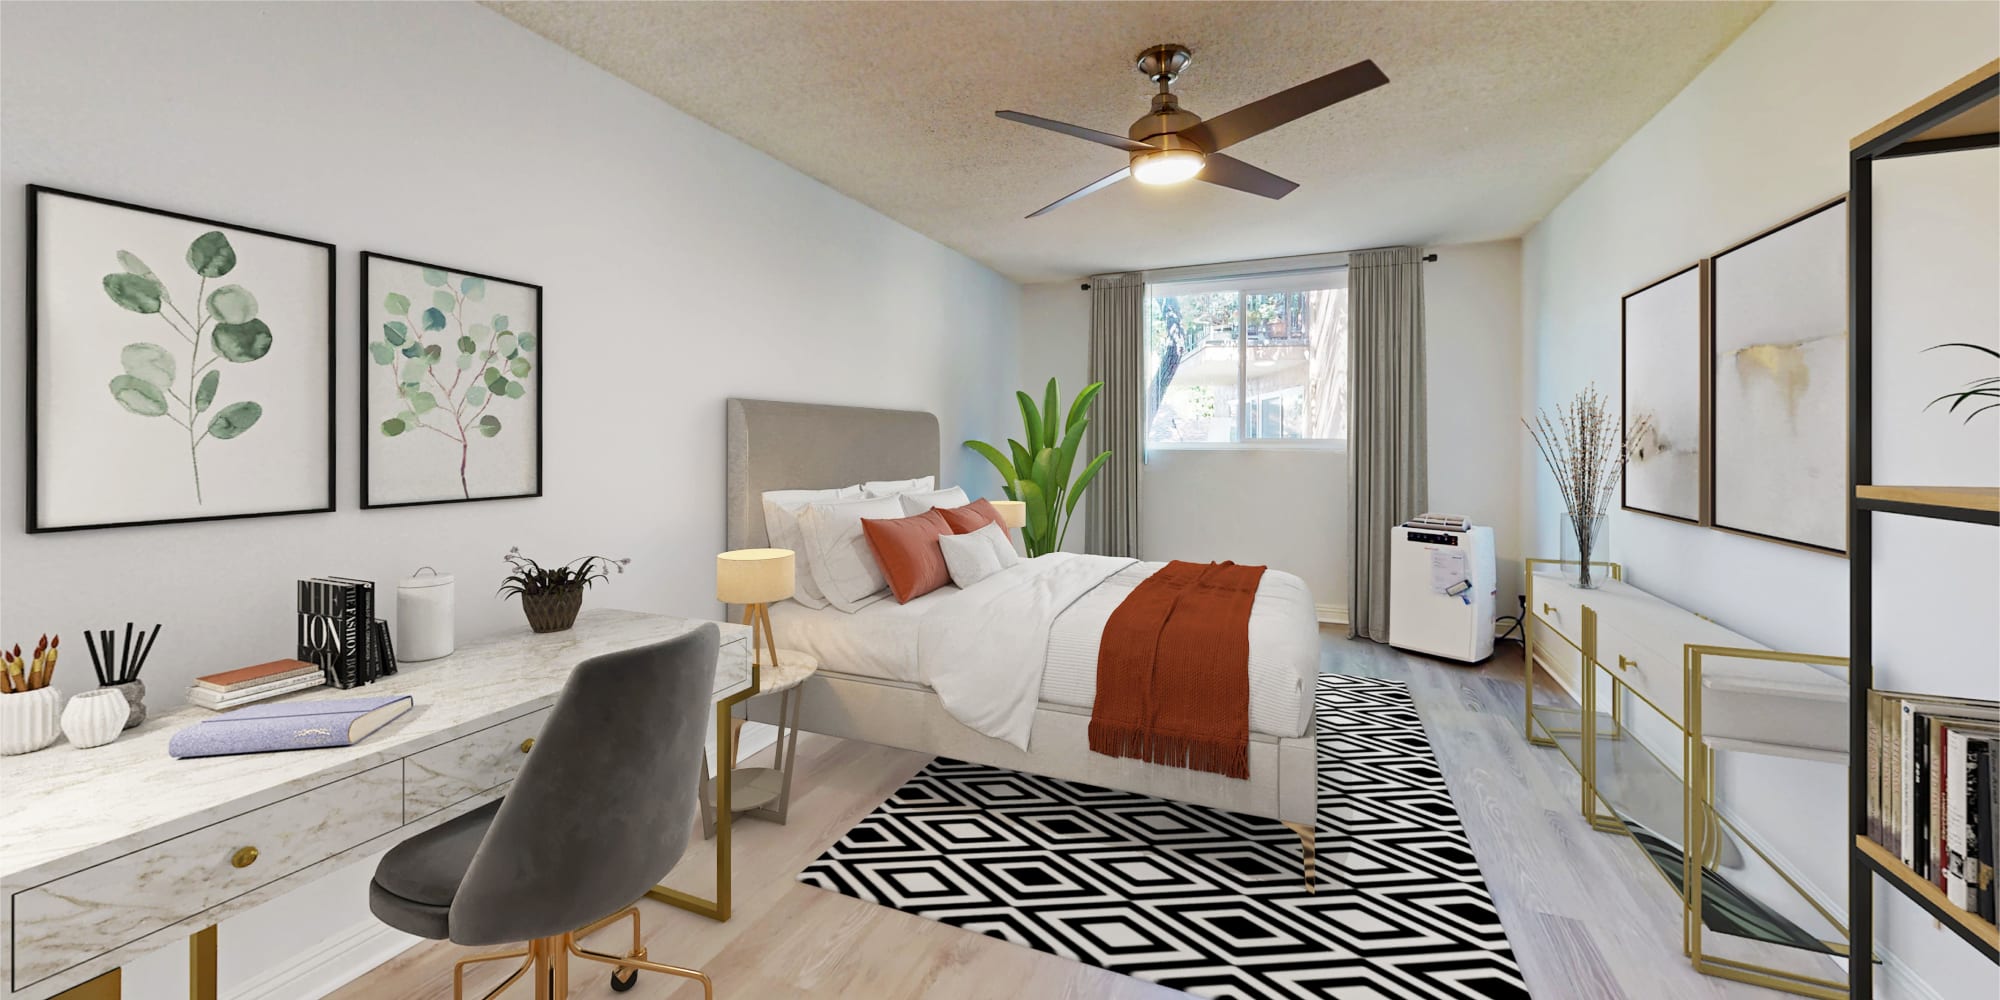 Well-furnished model home's primary bedroom with a ceiling fan at Casa Granada in Los Angeles, California